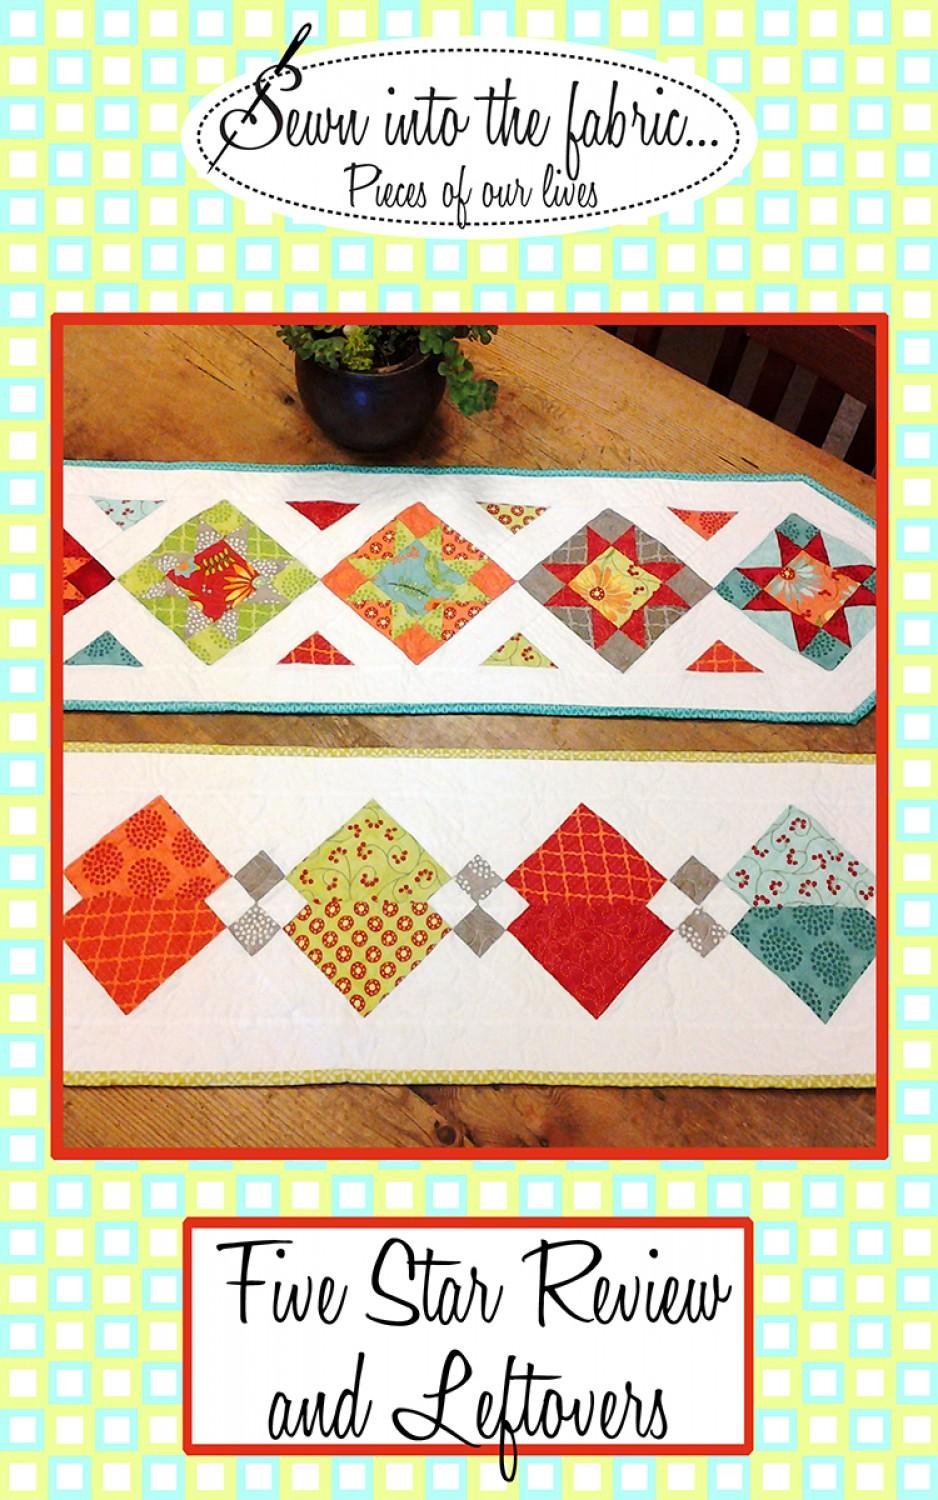 Five Star Review and Leftovers - Quilt Pattern - Sewn Wyoming - Kawartha Quilting and Sewing LTD.